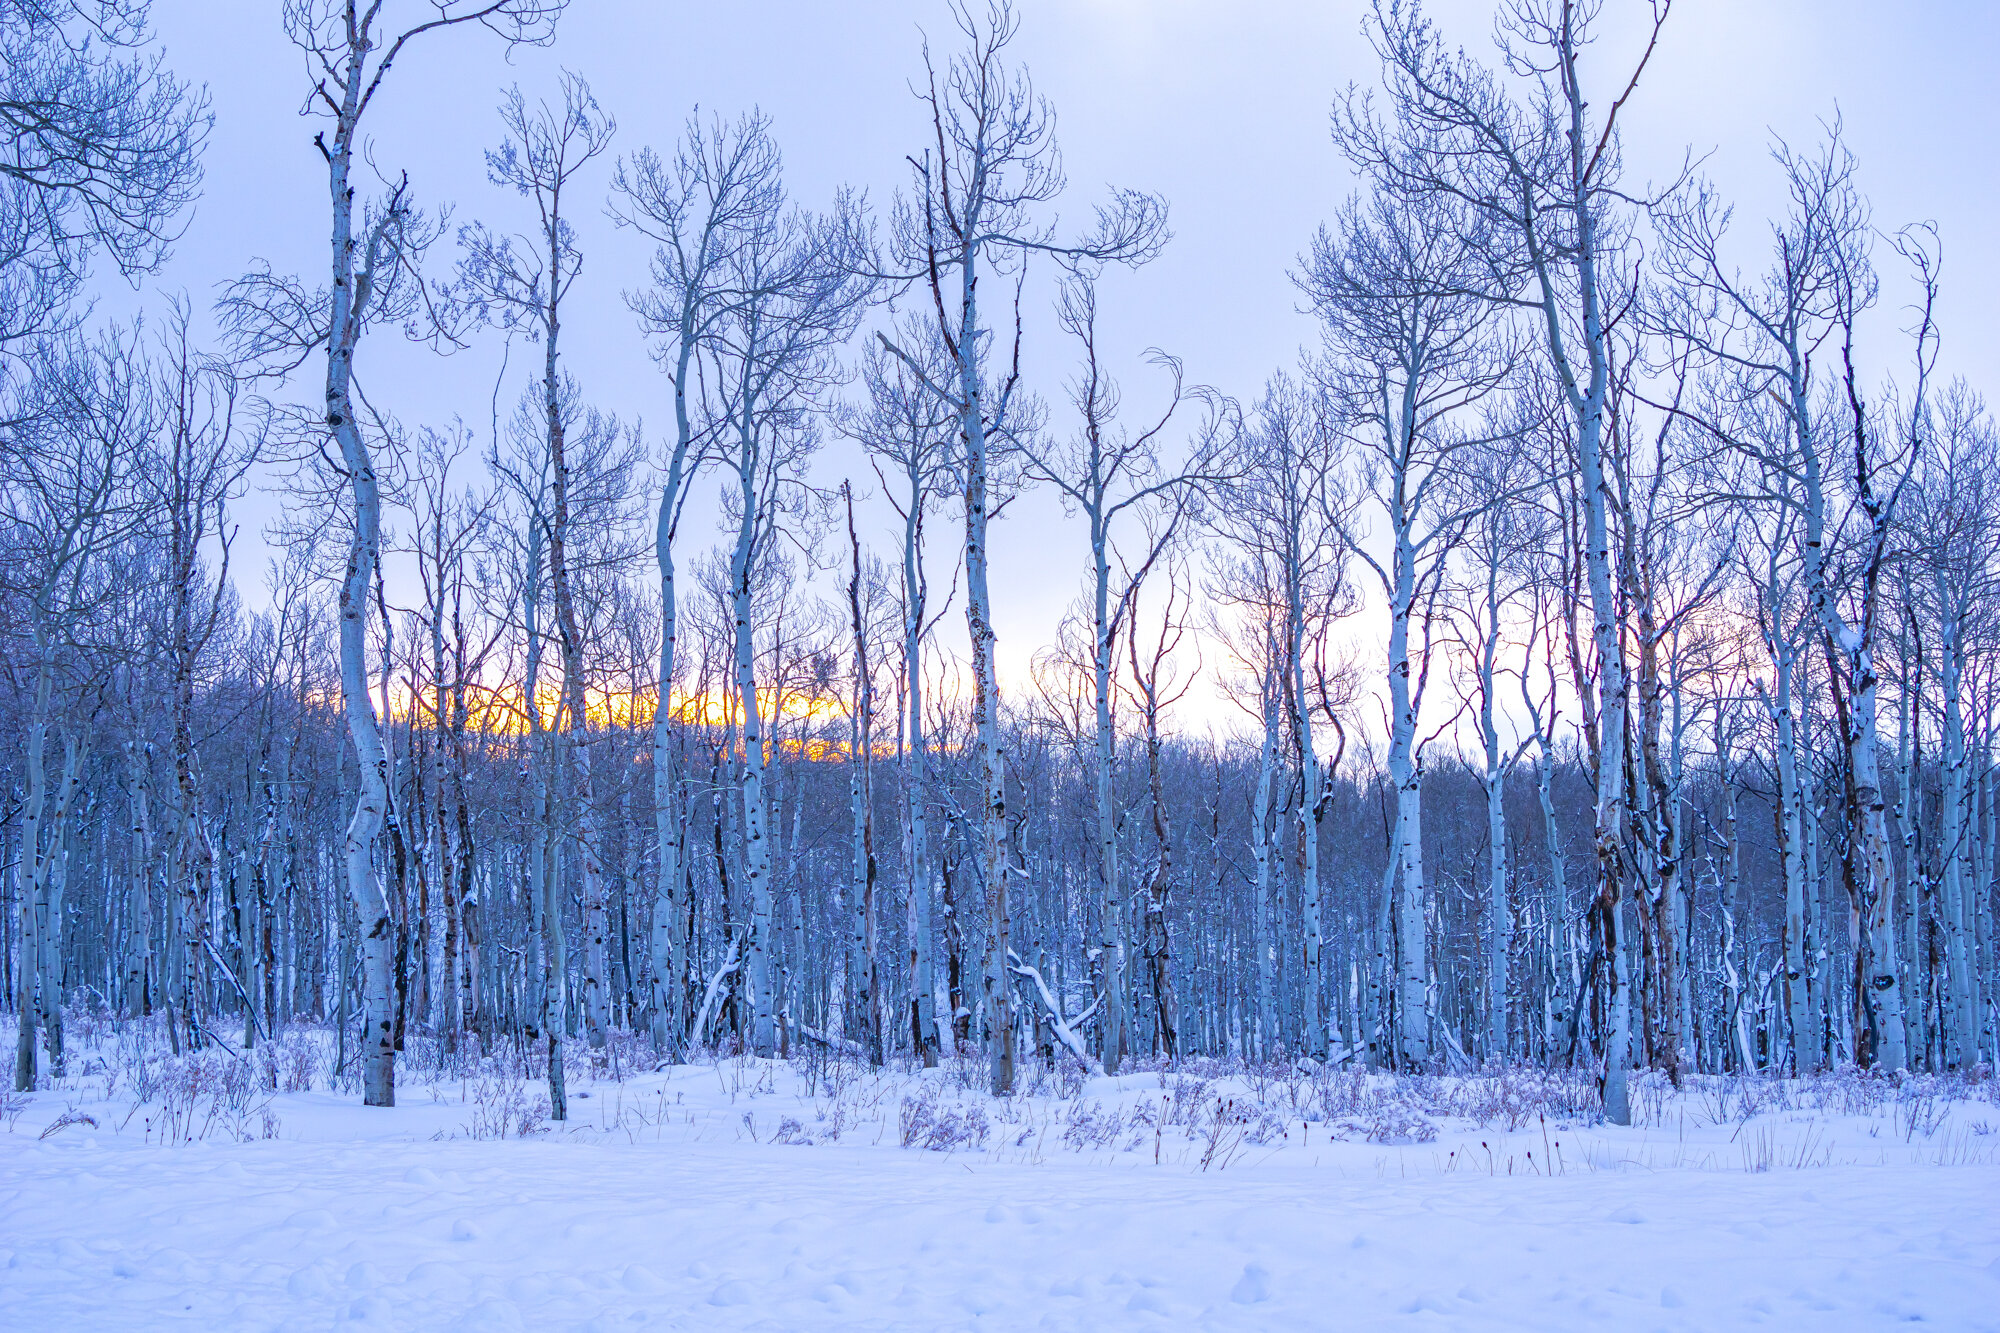 Aspens in Snow at Sunset